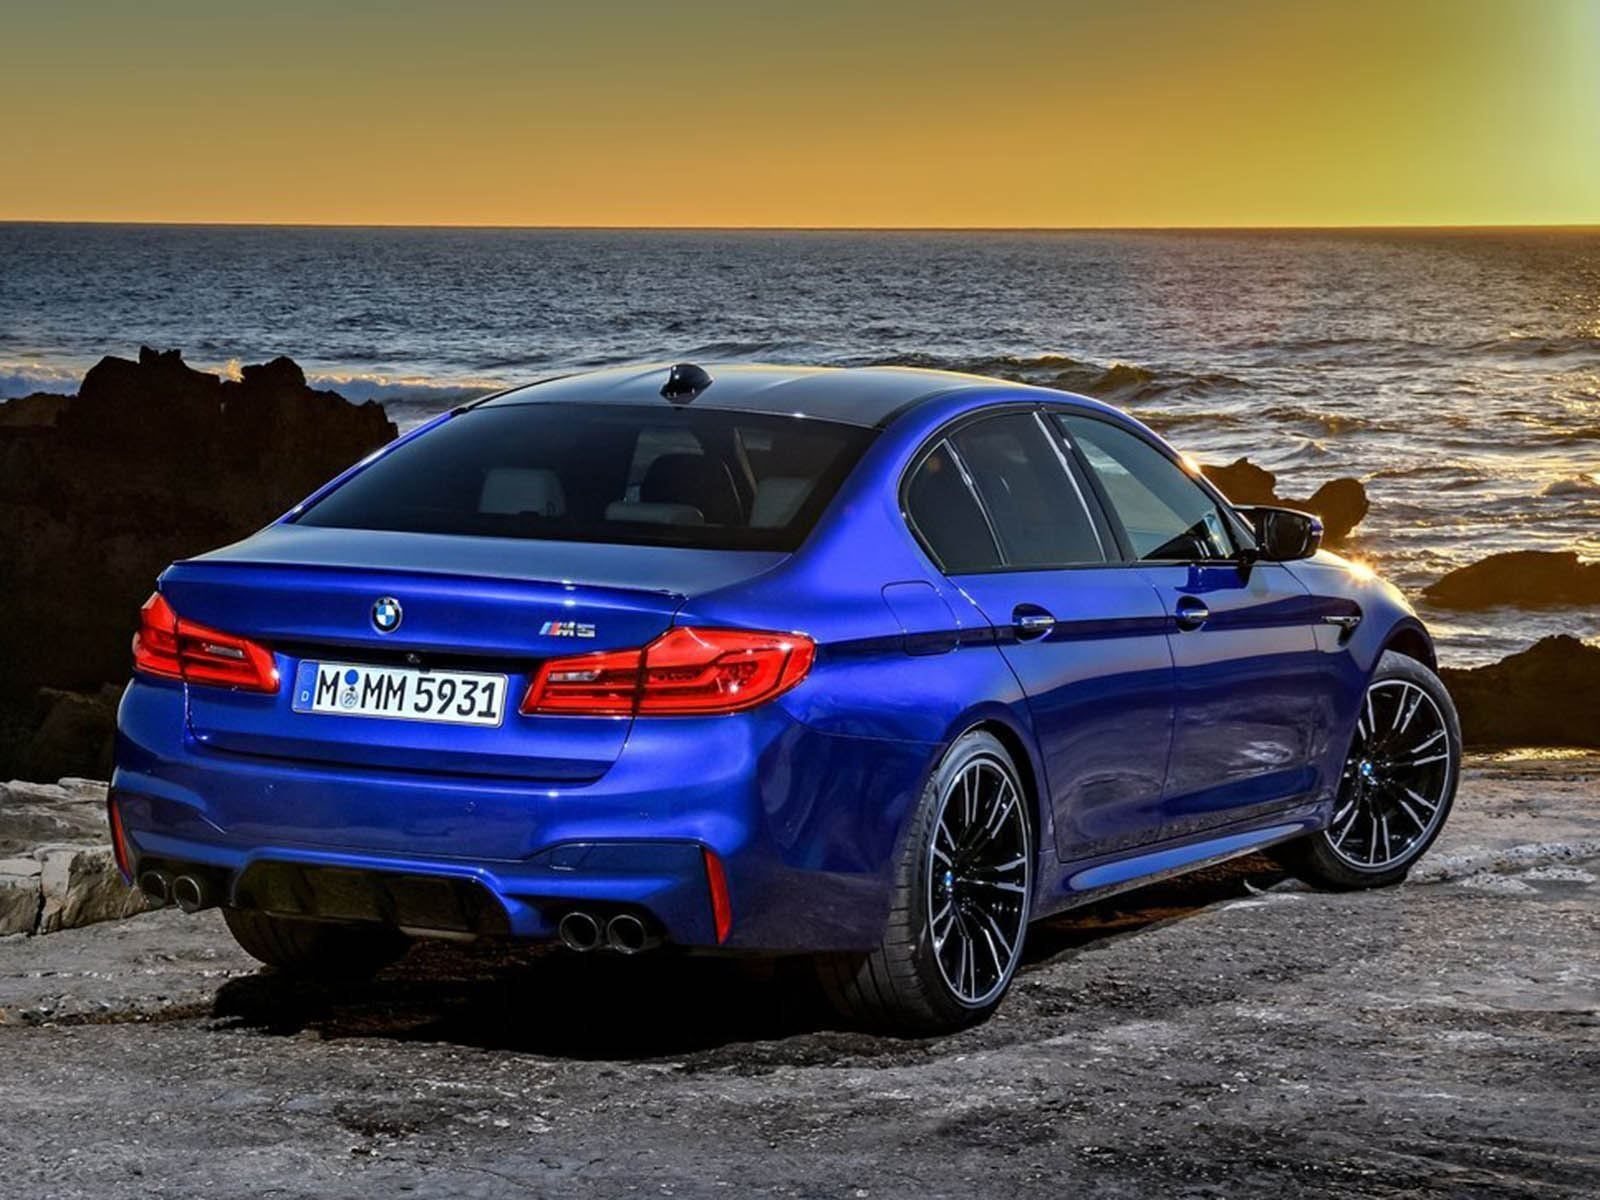 New BMW M5 Is One Of The Fastest Sedans To Ever Lap The